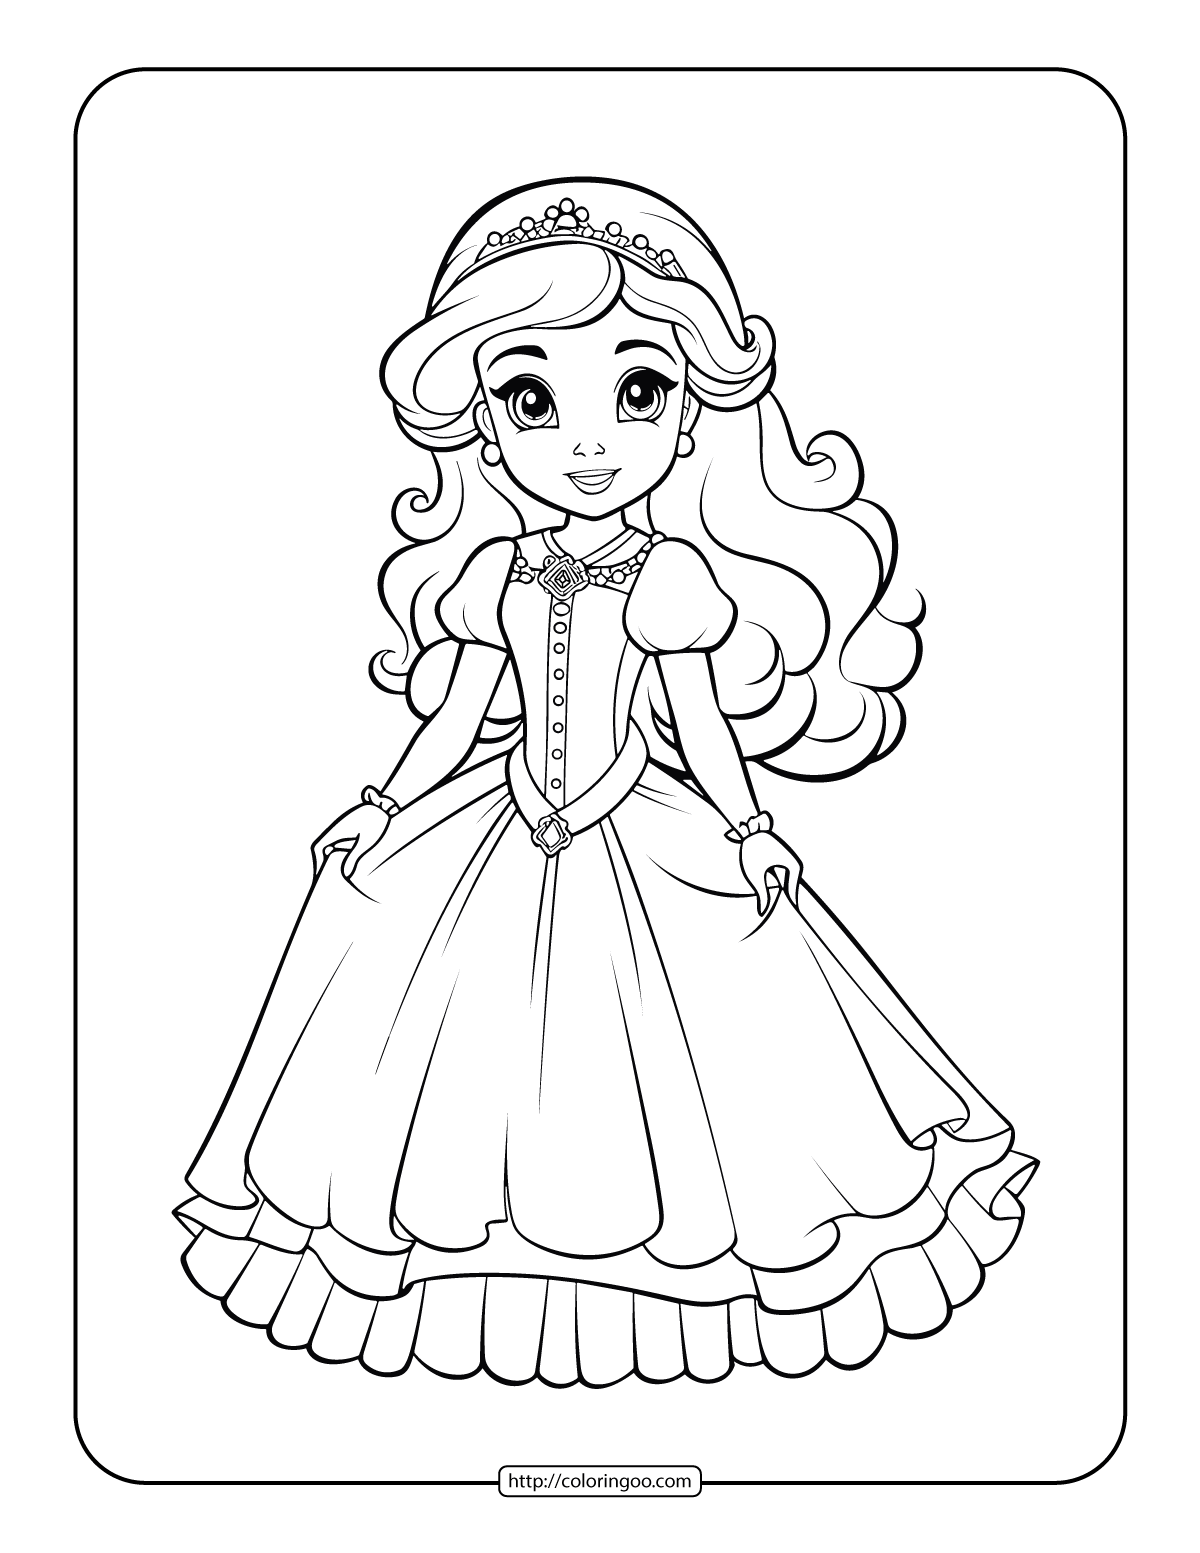 princess coloring pages for girls 06